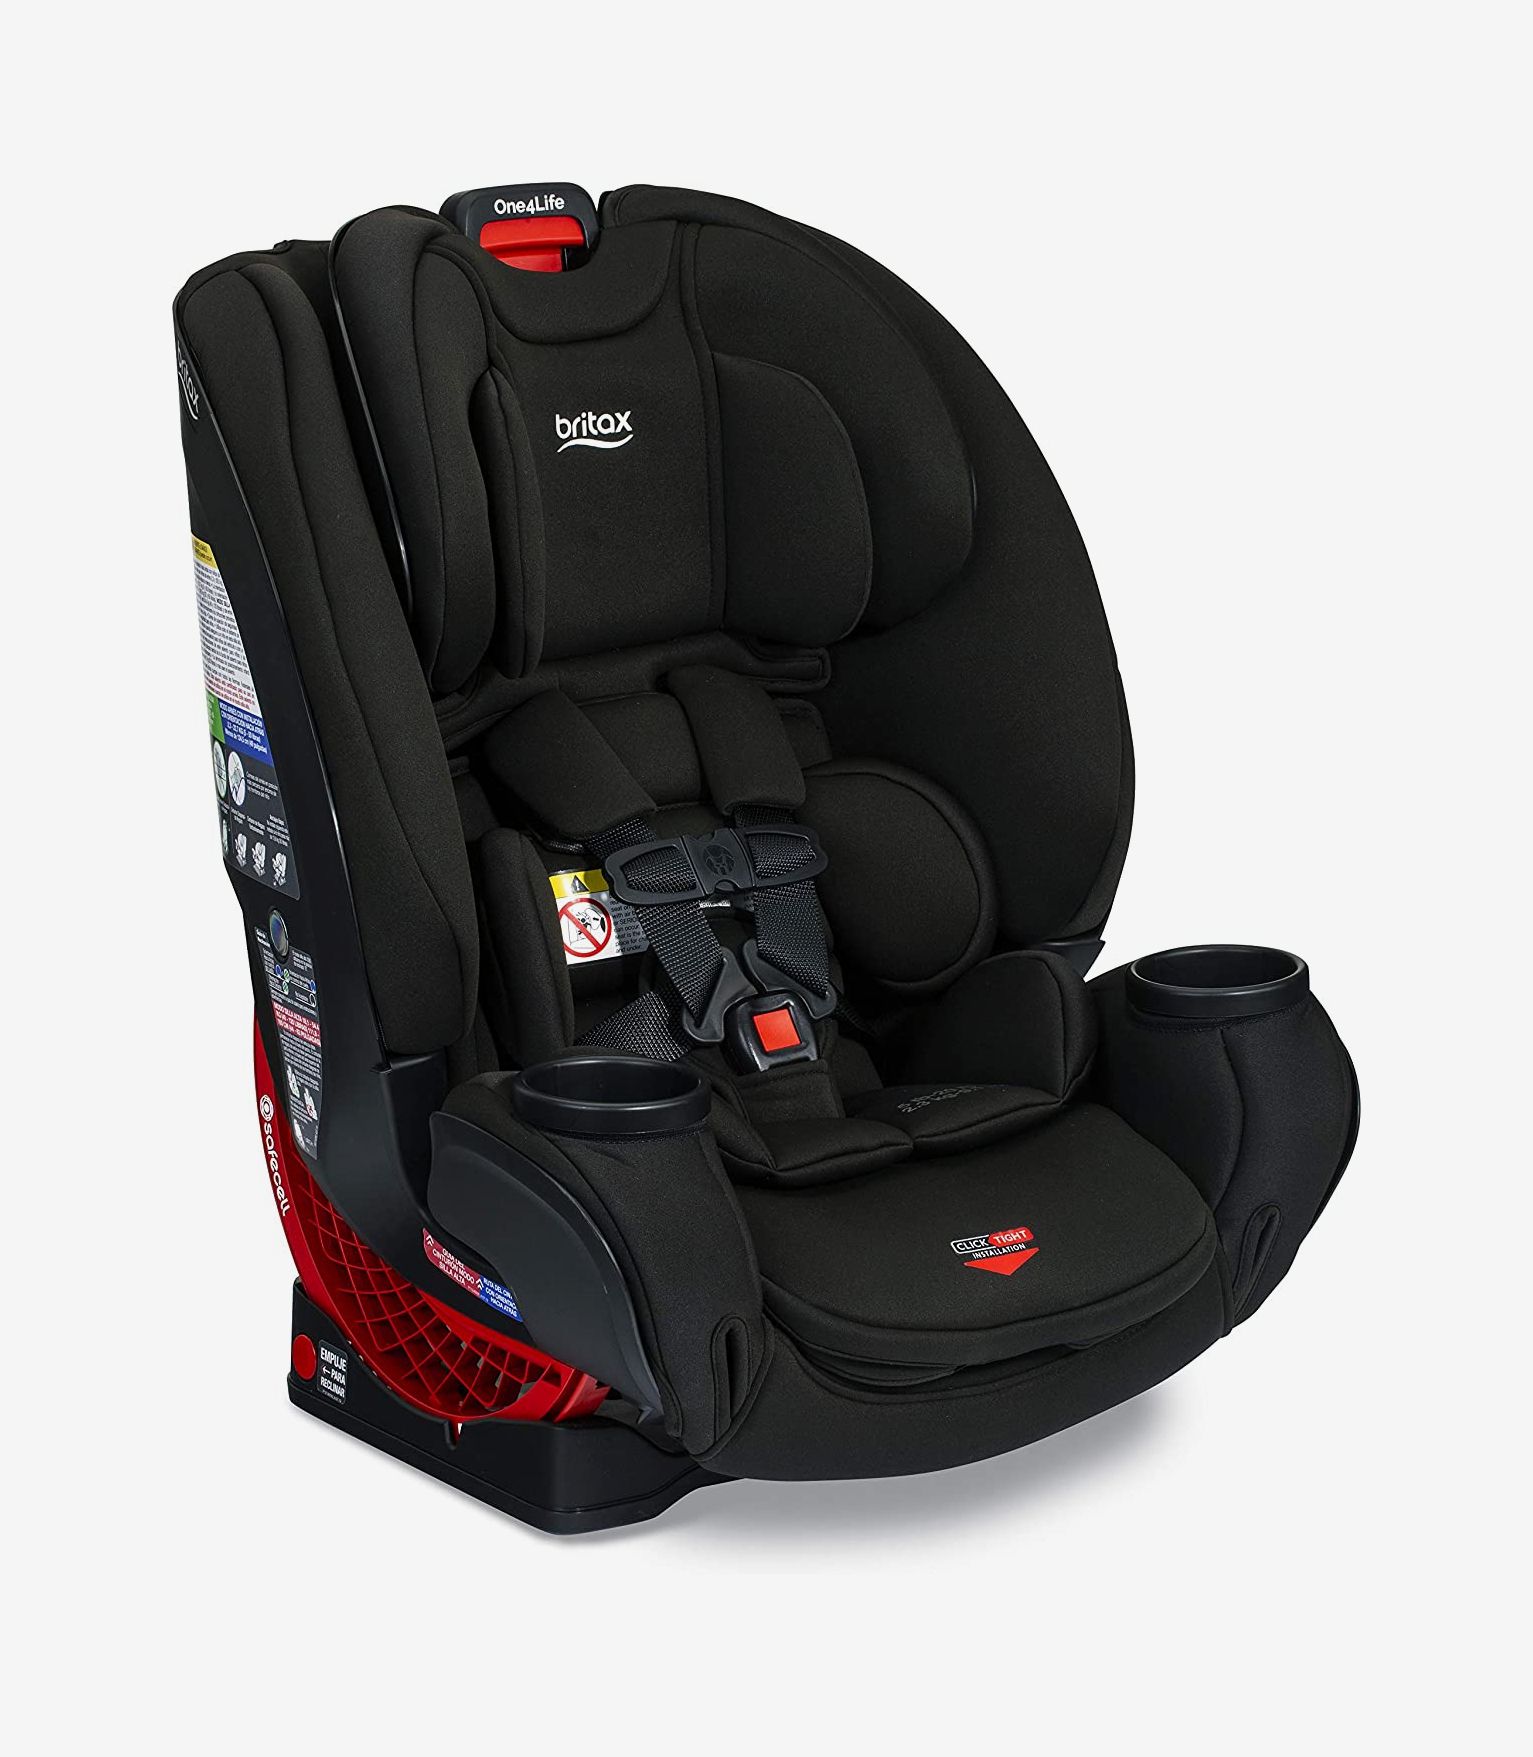 Best Car Seat For One Year Old | tunersread.com